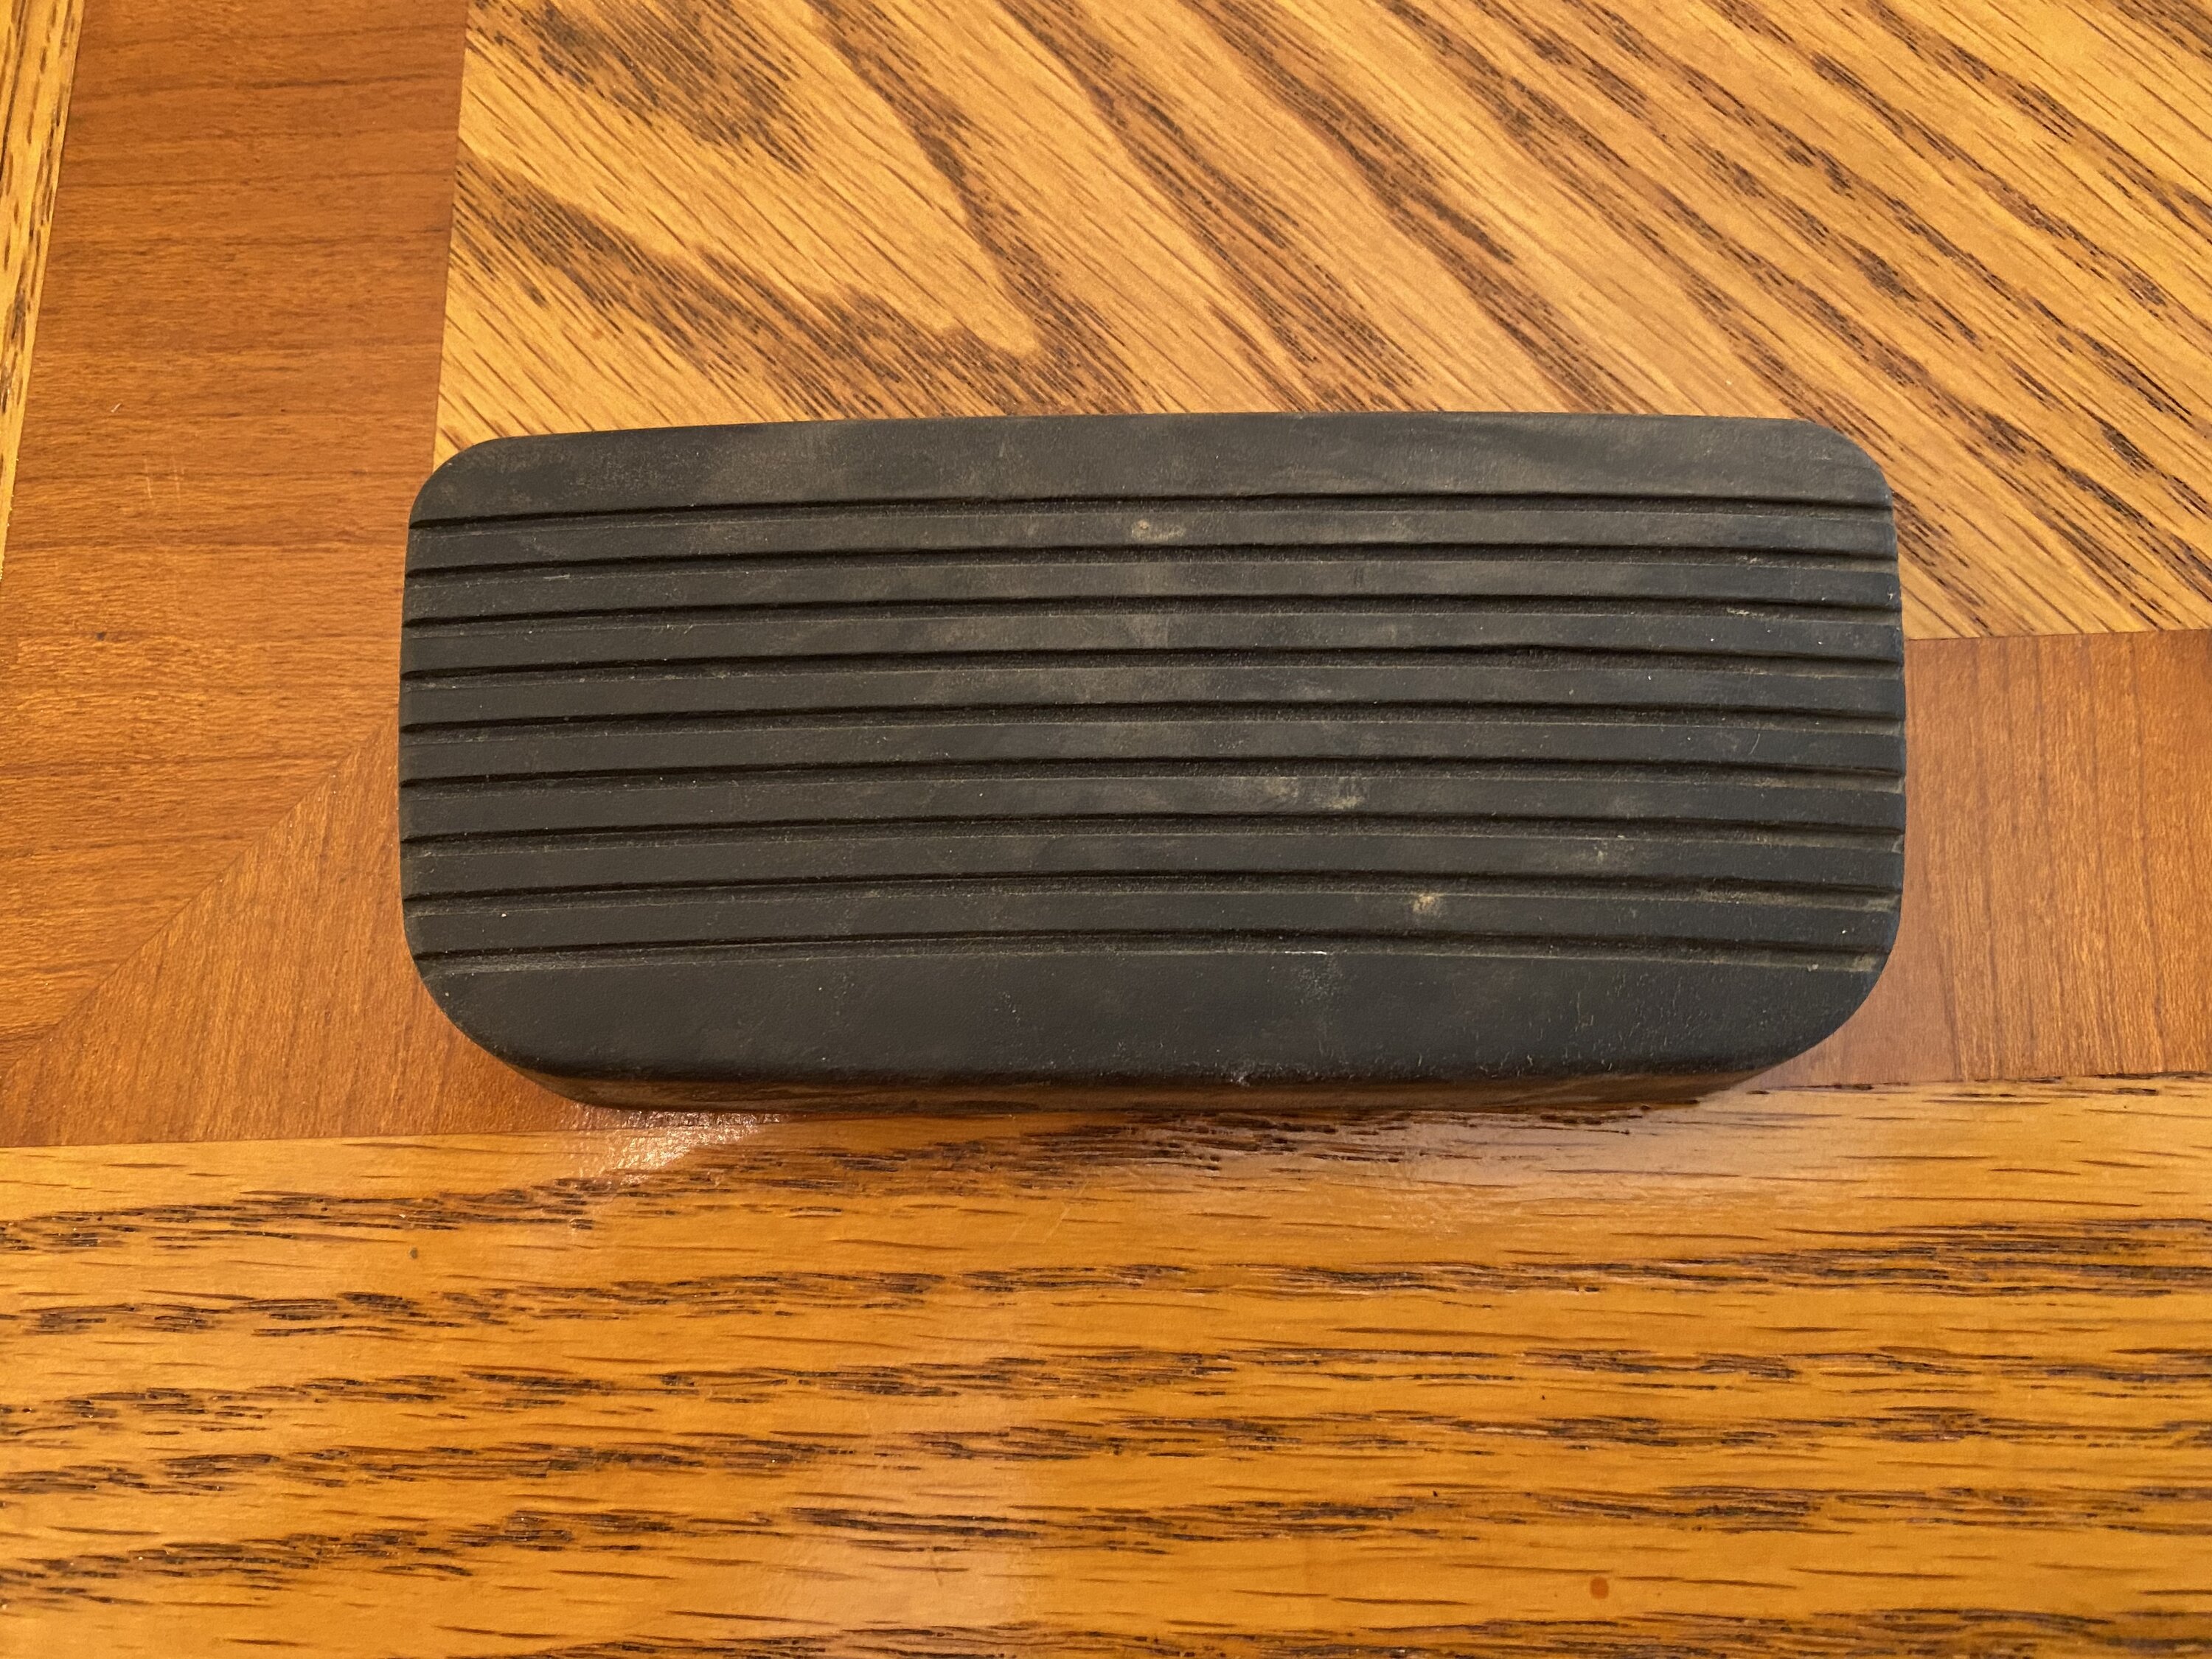 Ford Bronco Your Gas pedal has rubber: yes or no B5510857-B7FB-458A-8BD9-64F4040E82FF